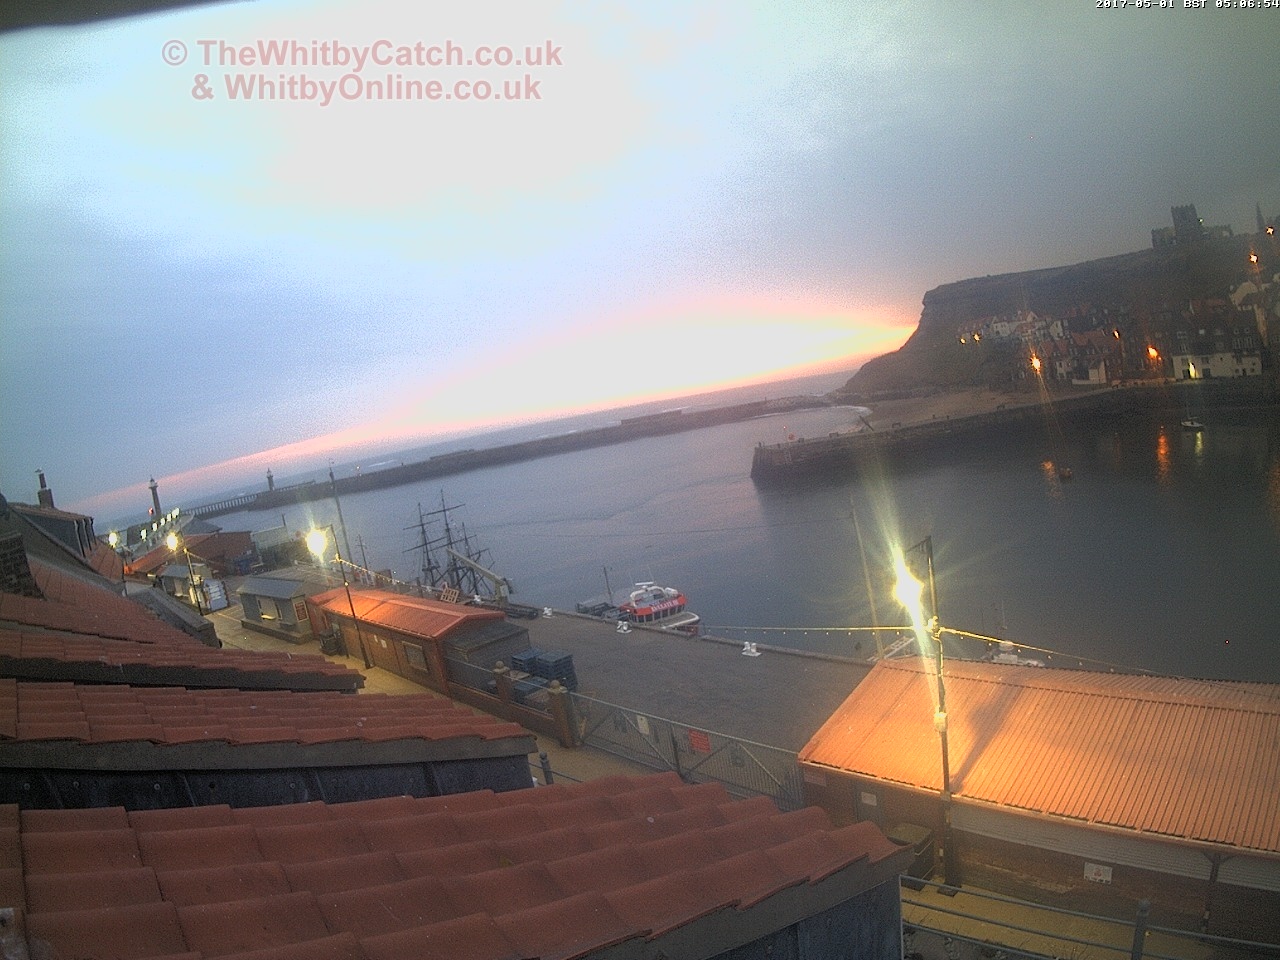 Whitby Mon 1st May 2017 05:07.